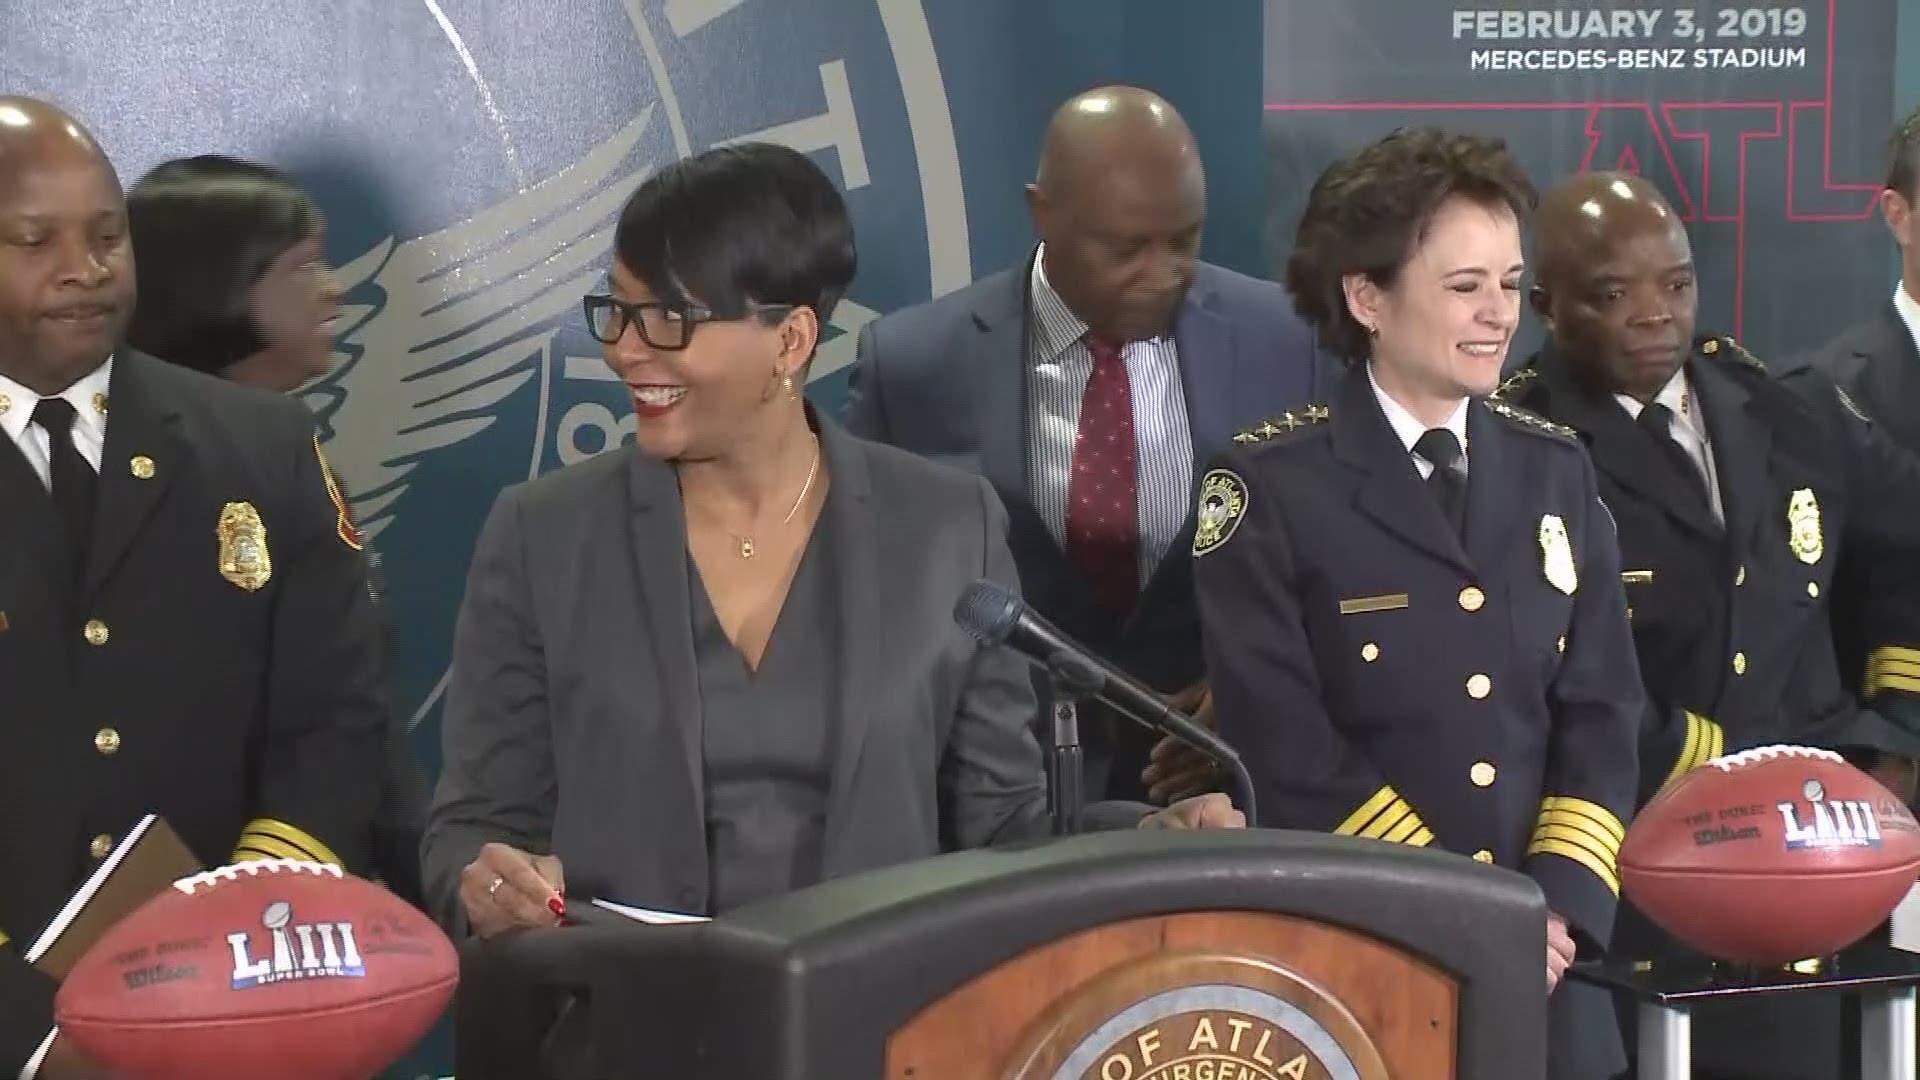 Atlanta Mayor Keisha Bottoms holds a pre-Superbowl press conference, where she addresses her comment about Saints fans and welcomes them to the city.